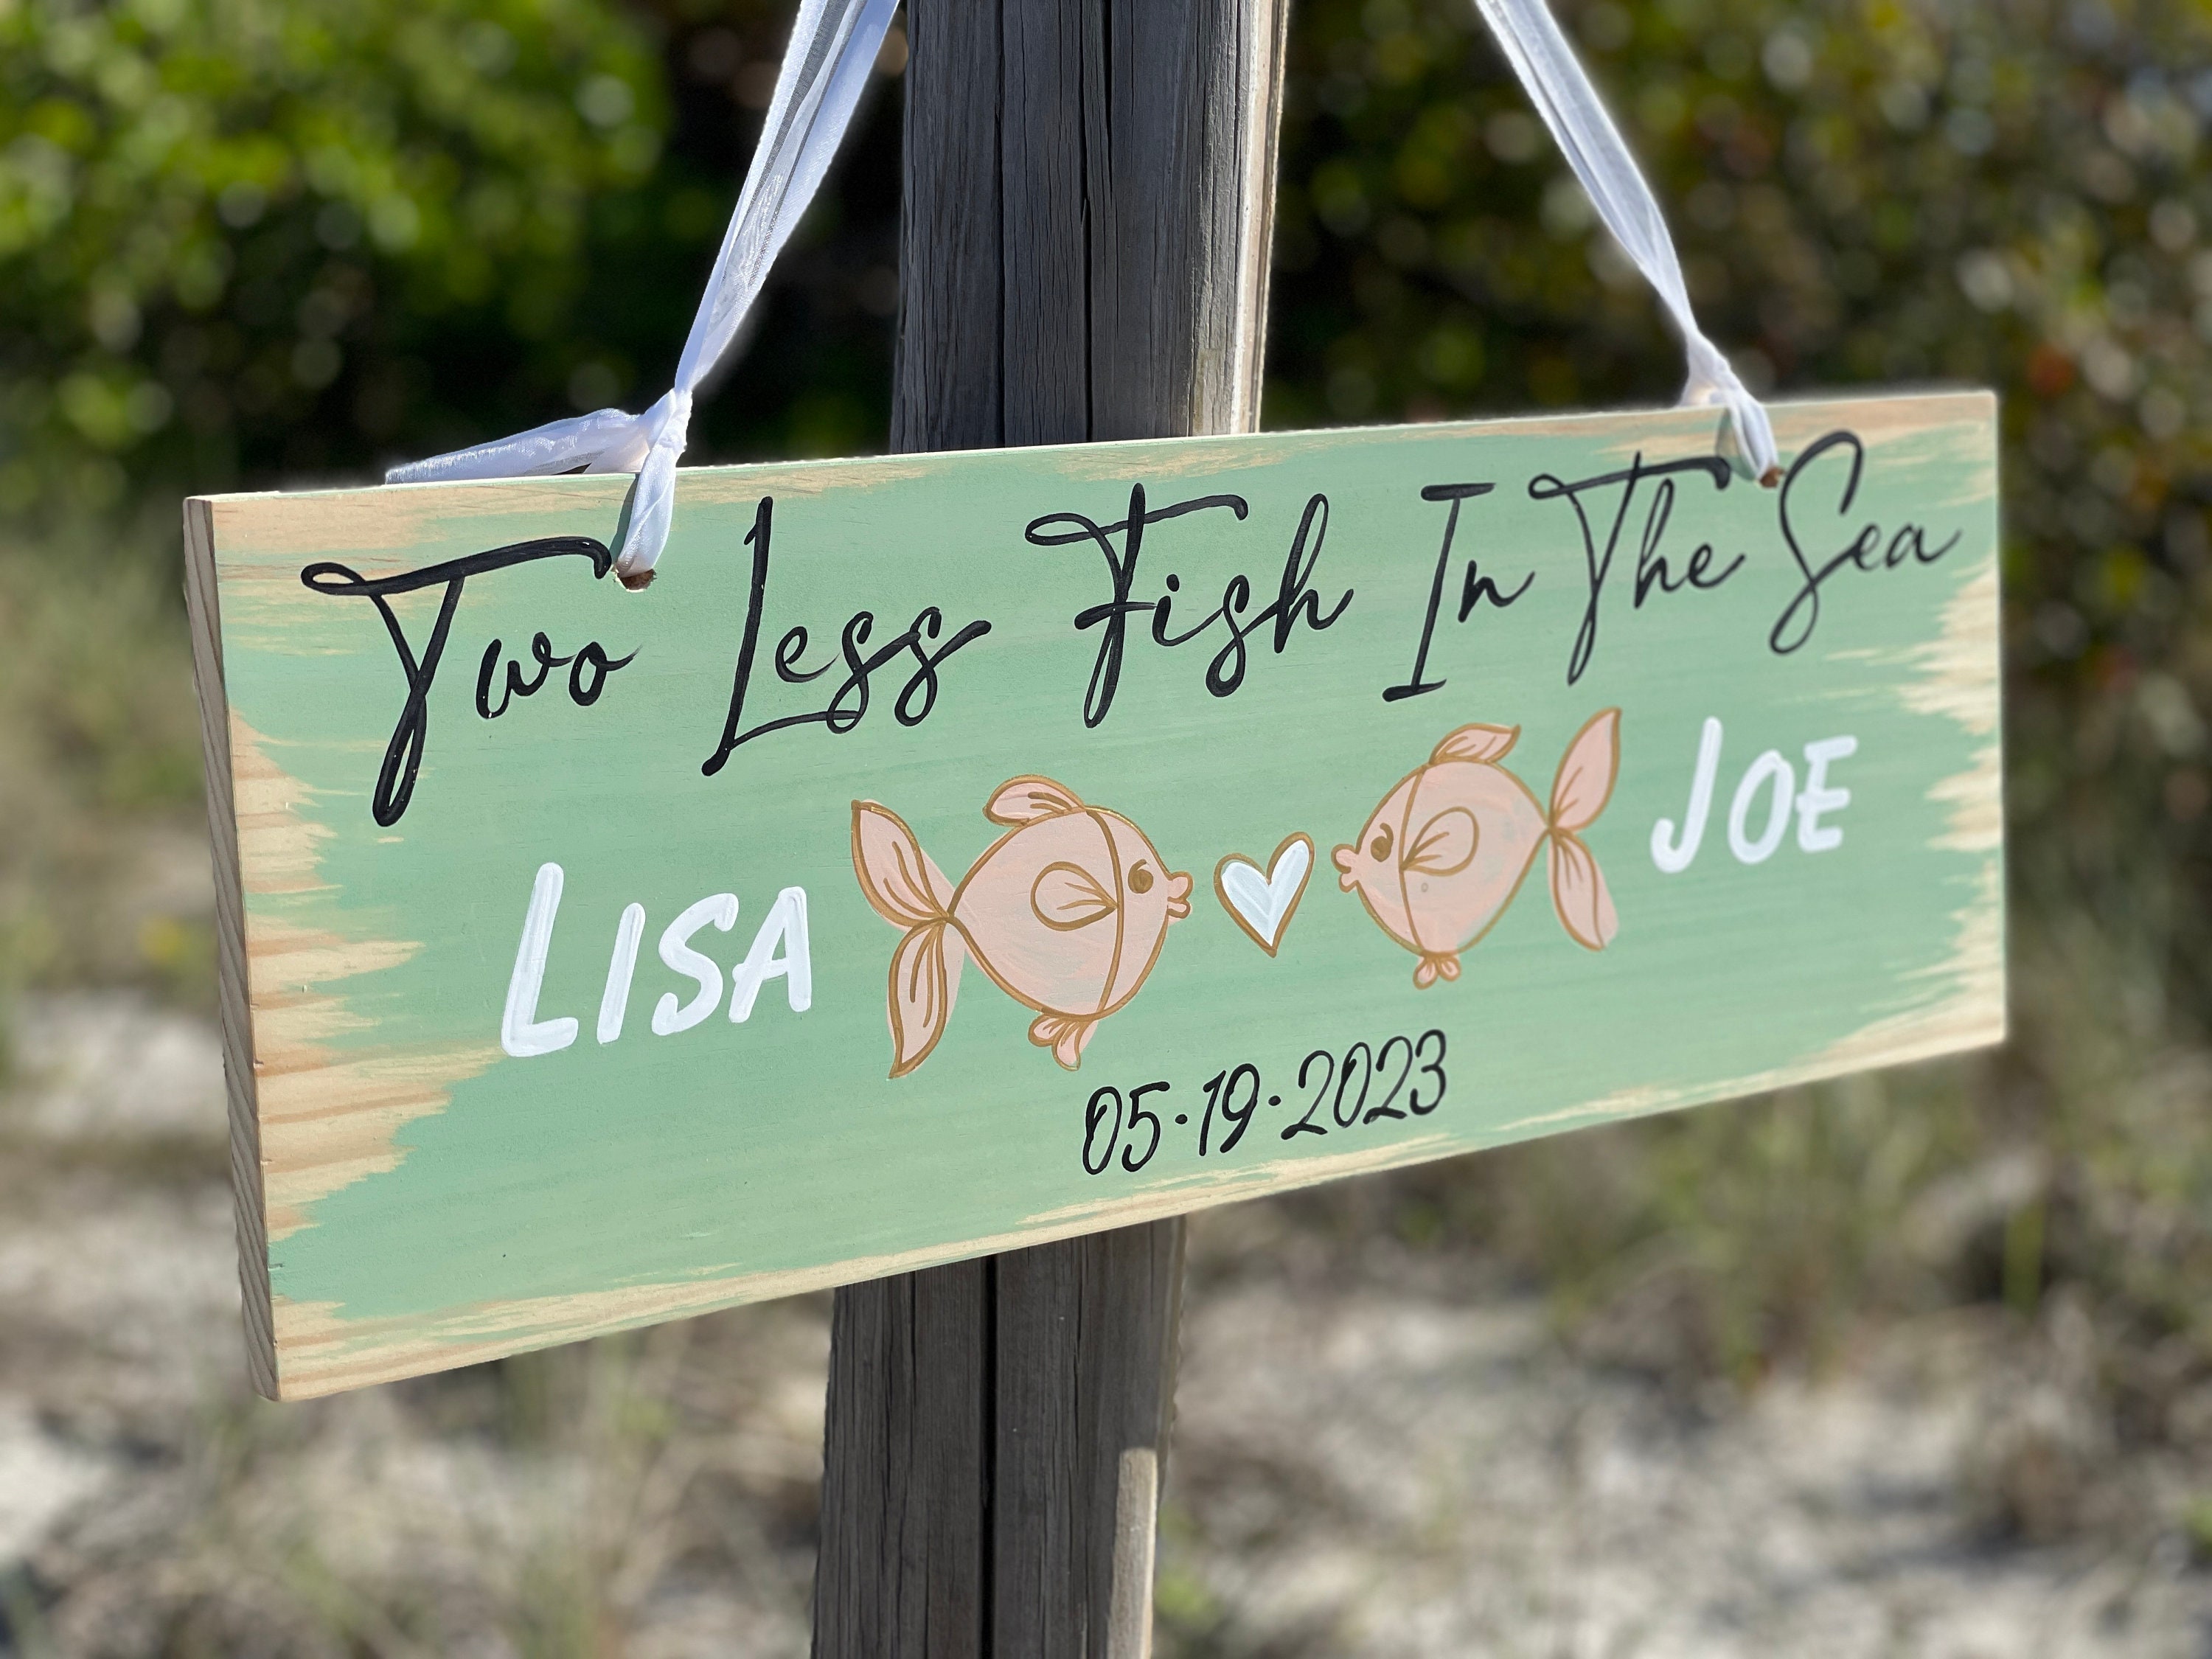 Newlywed gift, two less fish in the sea personalized sign, Beach